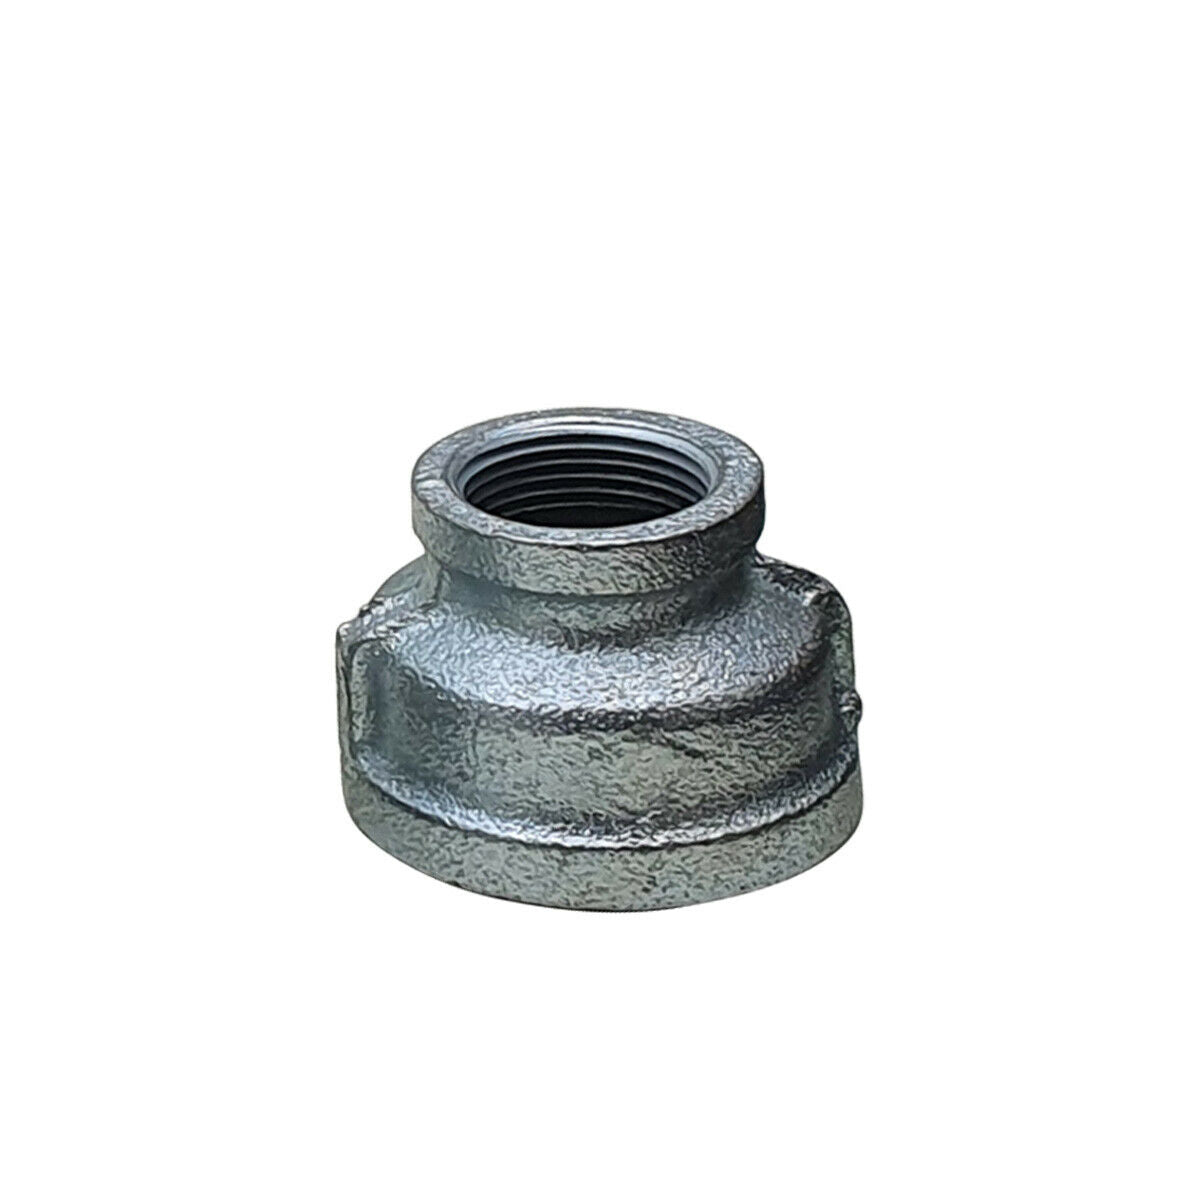 Galvanized Malleable Iron Pipe Fittings Reducer Socket~4650